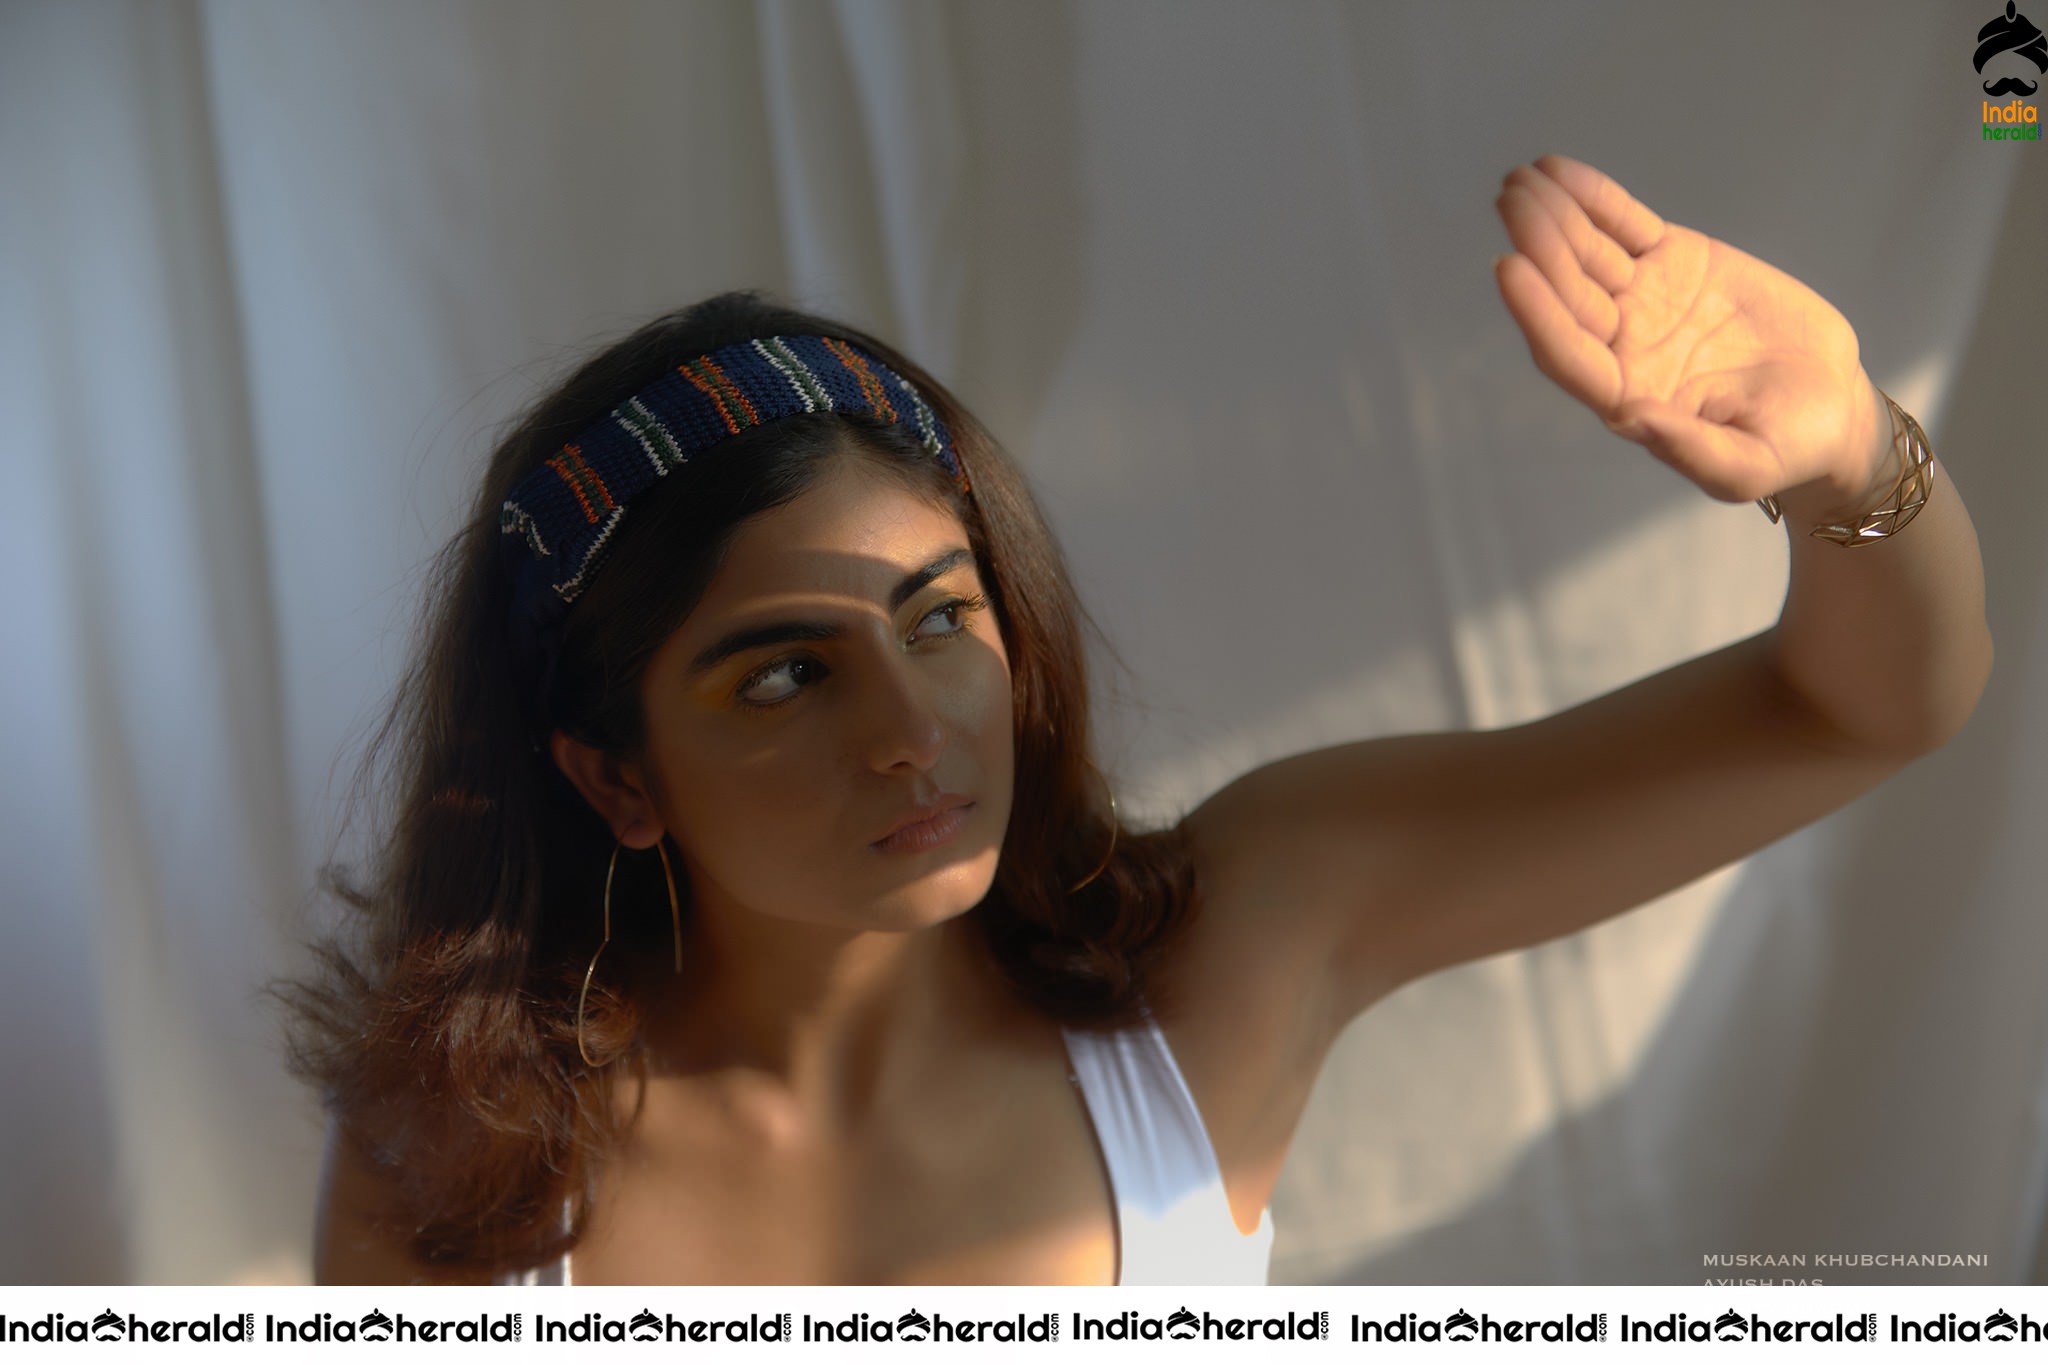 Latest Sizzling Hot Photos of George Reddy movie fame Muskaan Khubchandani